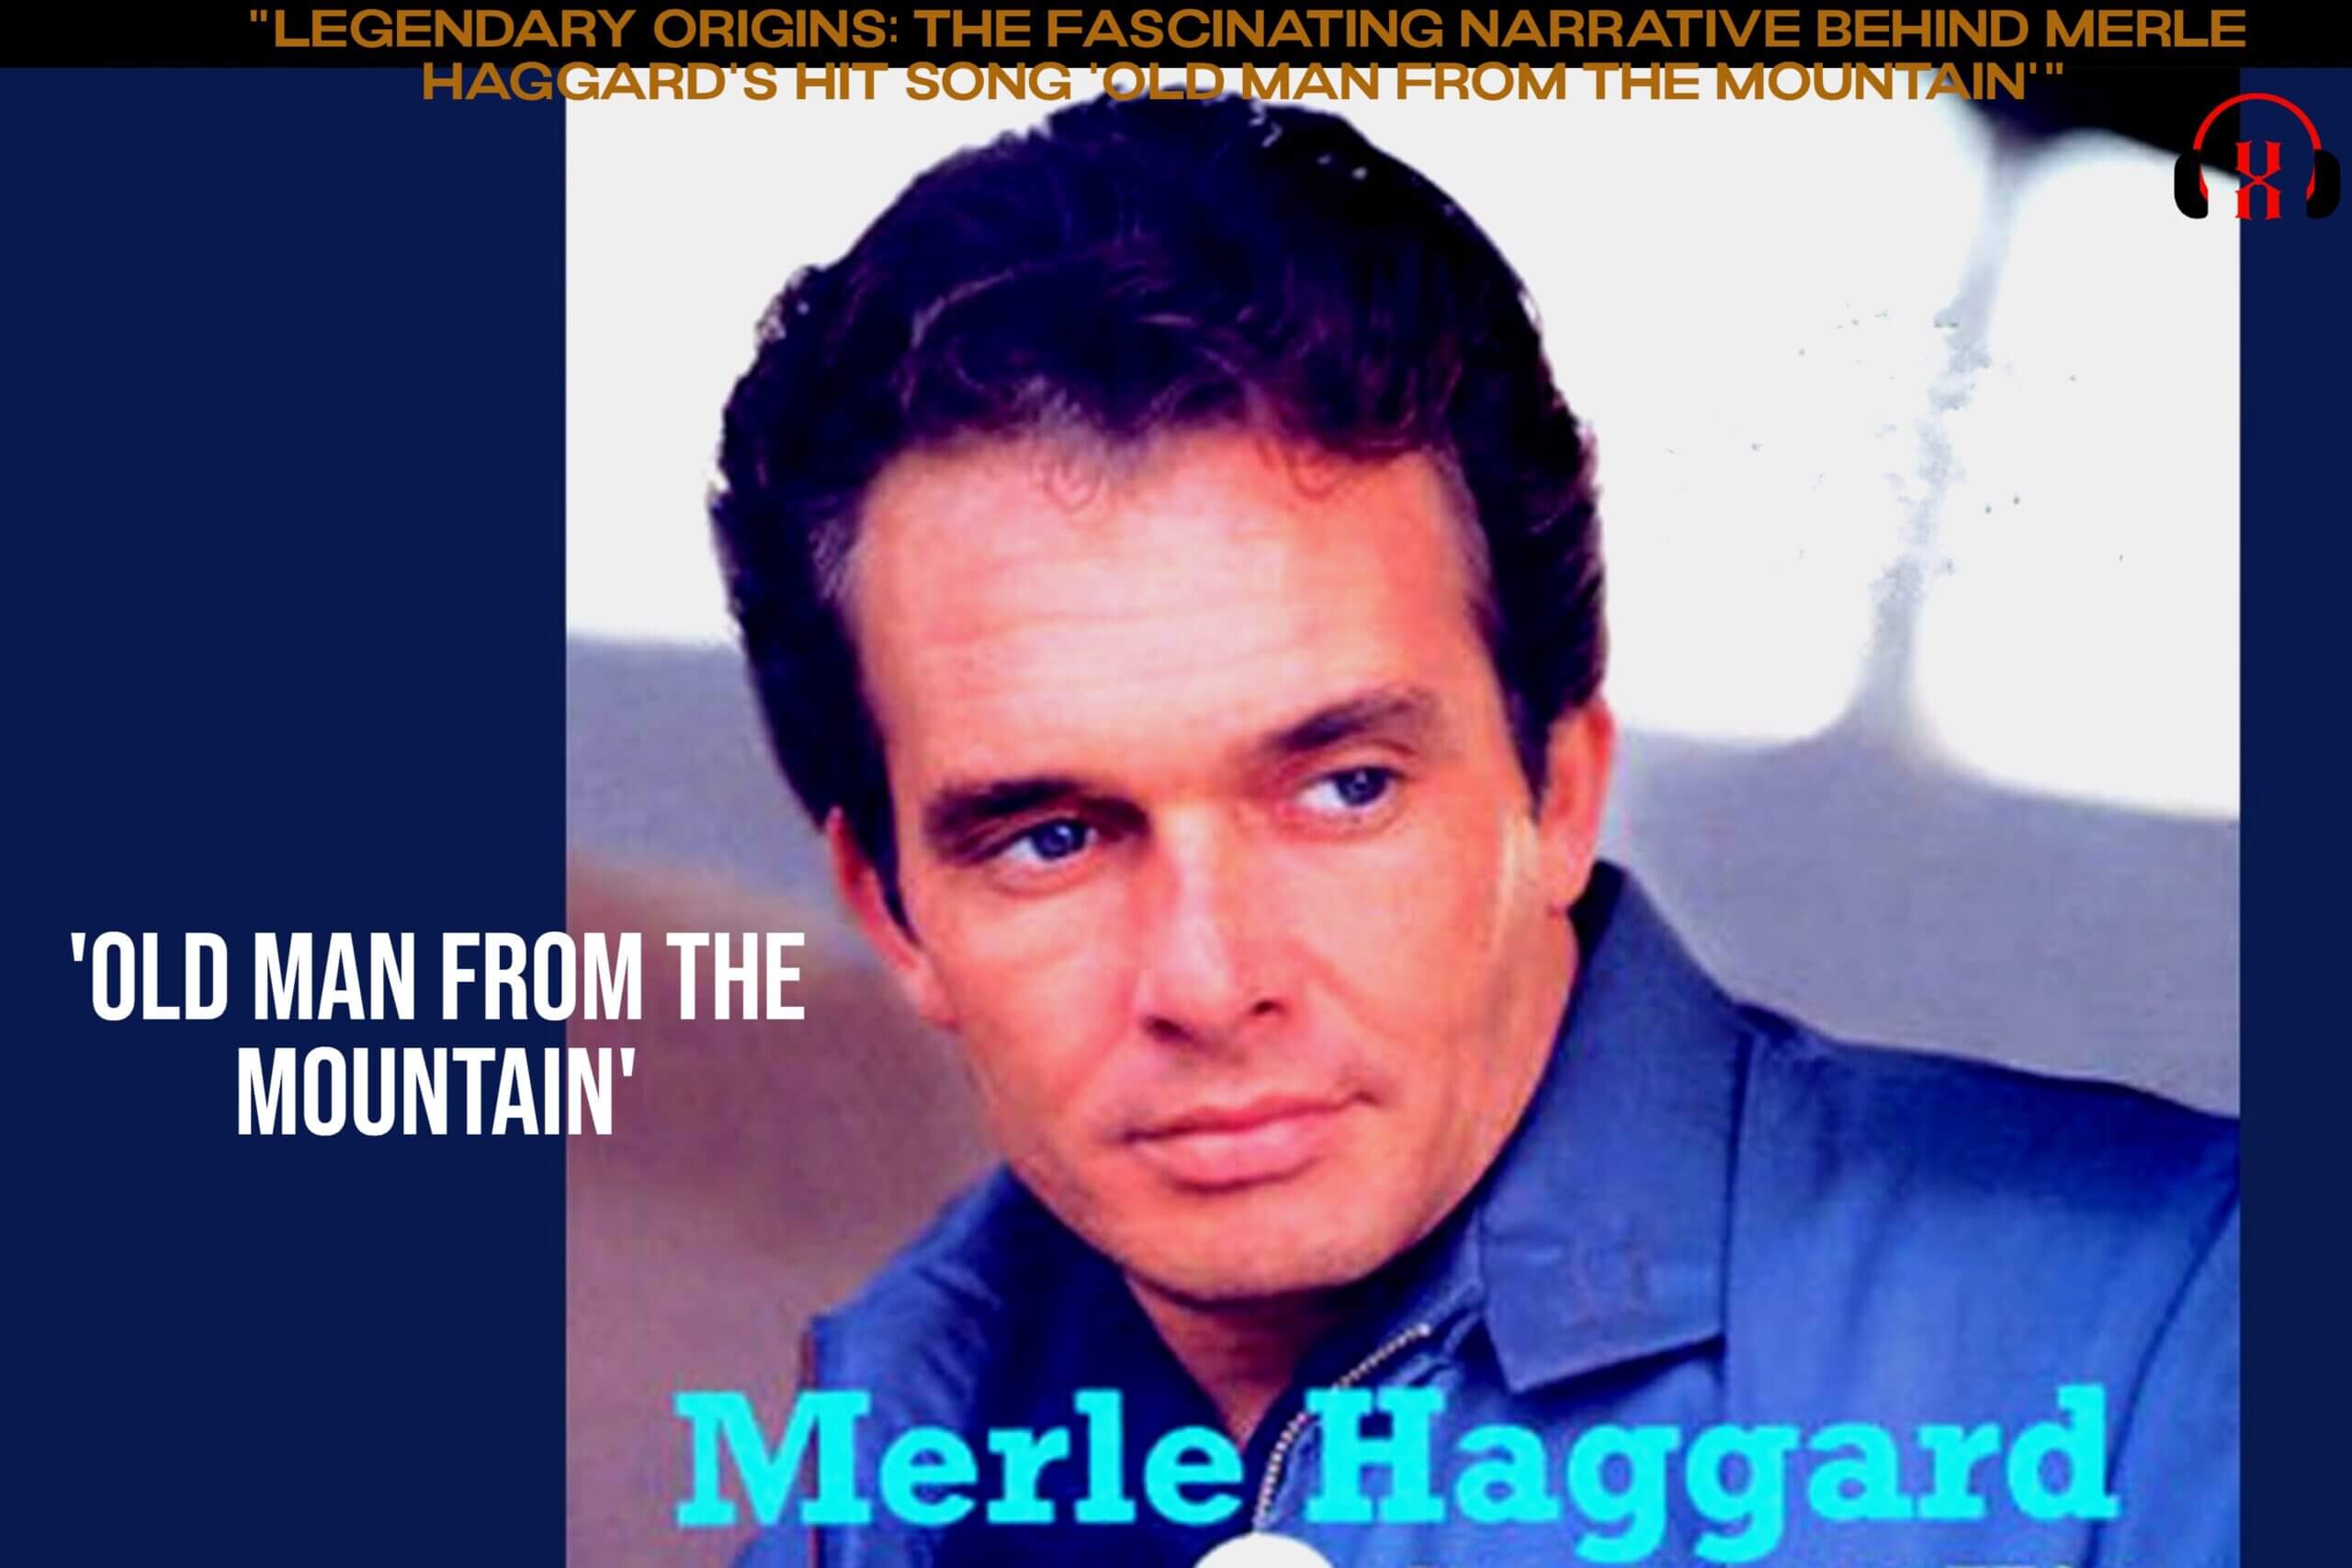 “Legendary Origins: The Fascinating Narrative Behind Merle Haggard’s Hit Song ‘Old Man From The Mountain'”